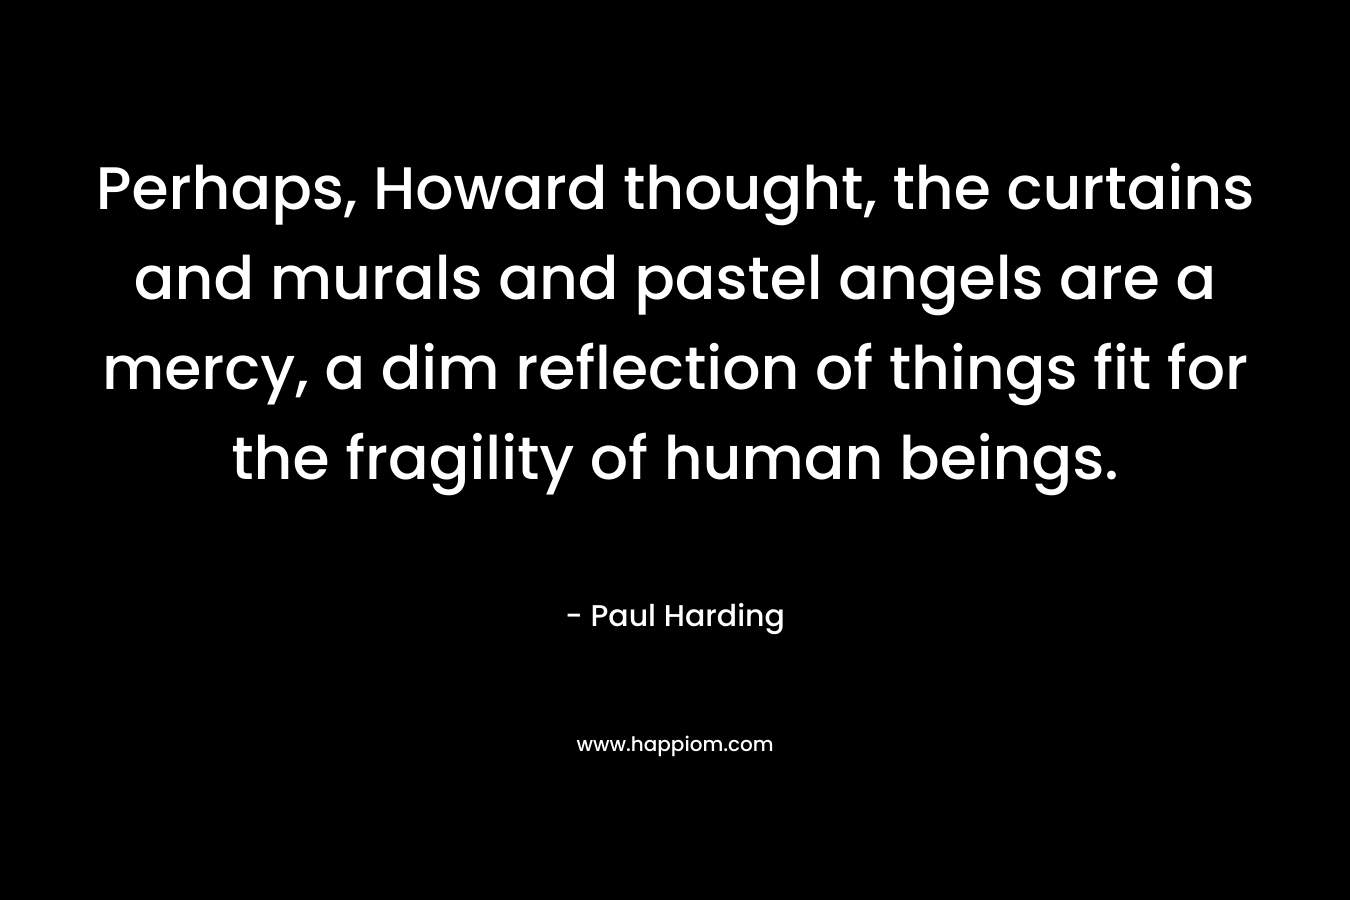 Perhaps, Howard thought, the curtains and murals and pastel angels are a mercy, a dim reflection of things fit for the fragility of human beings. – Paul Harding